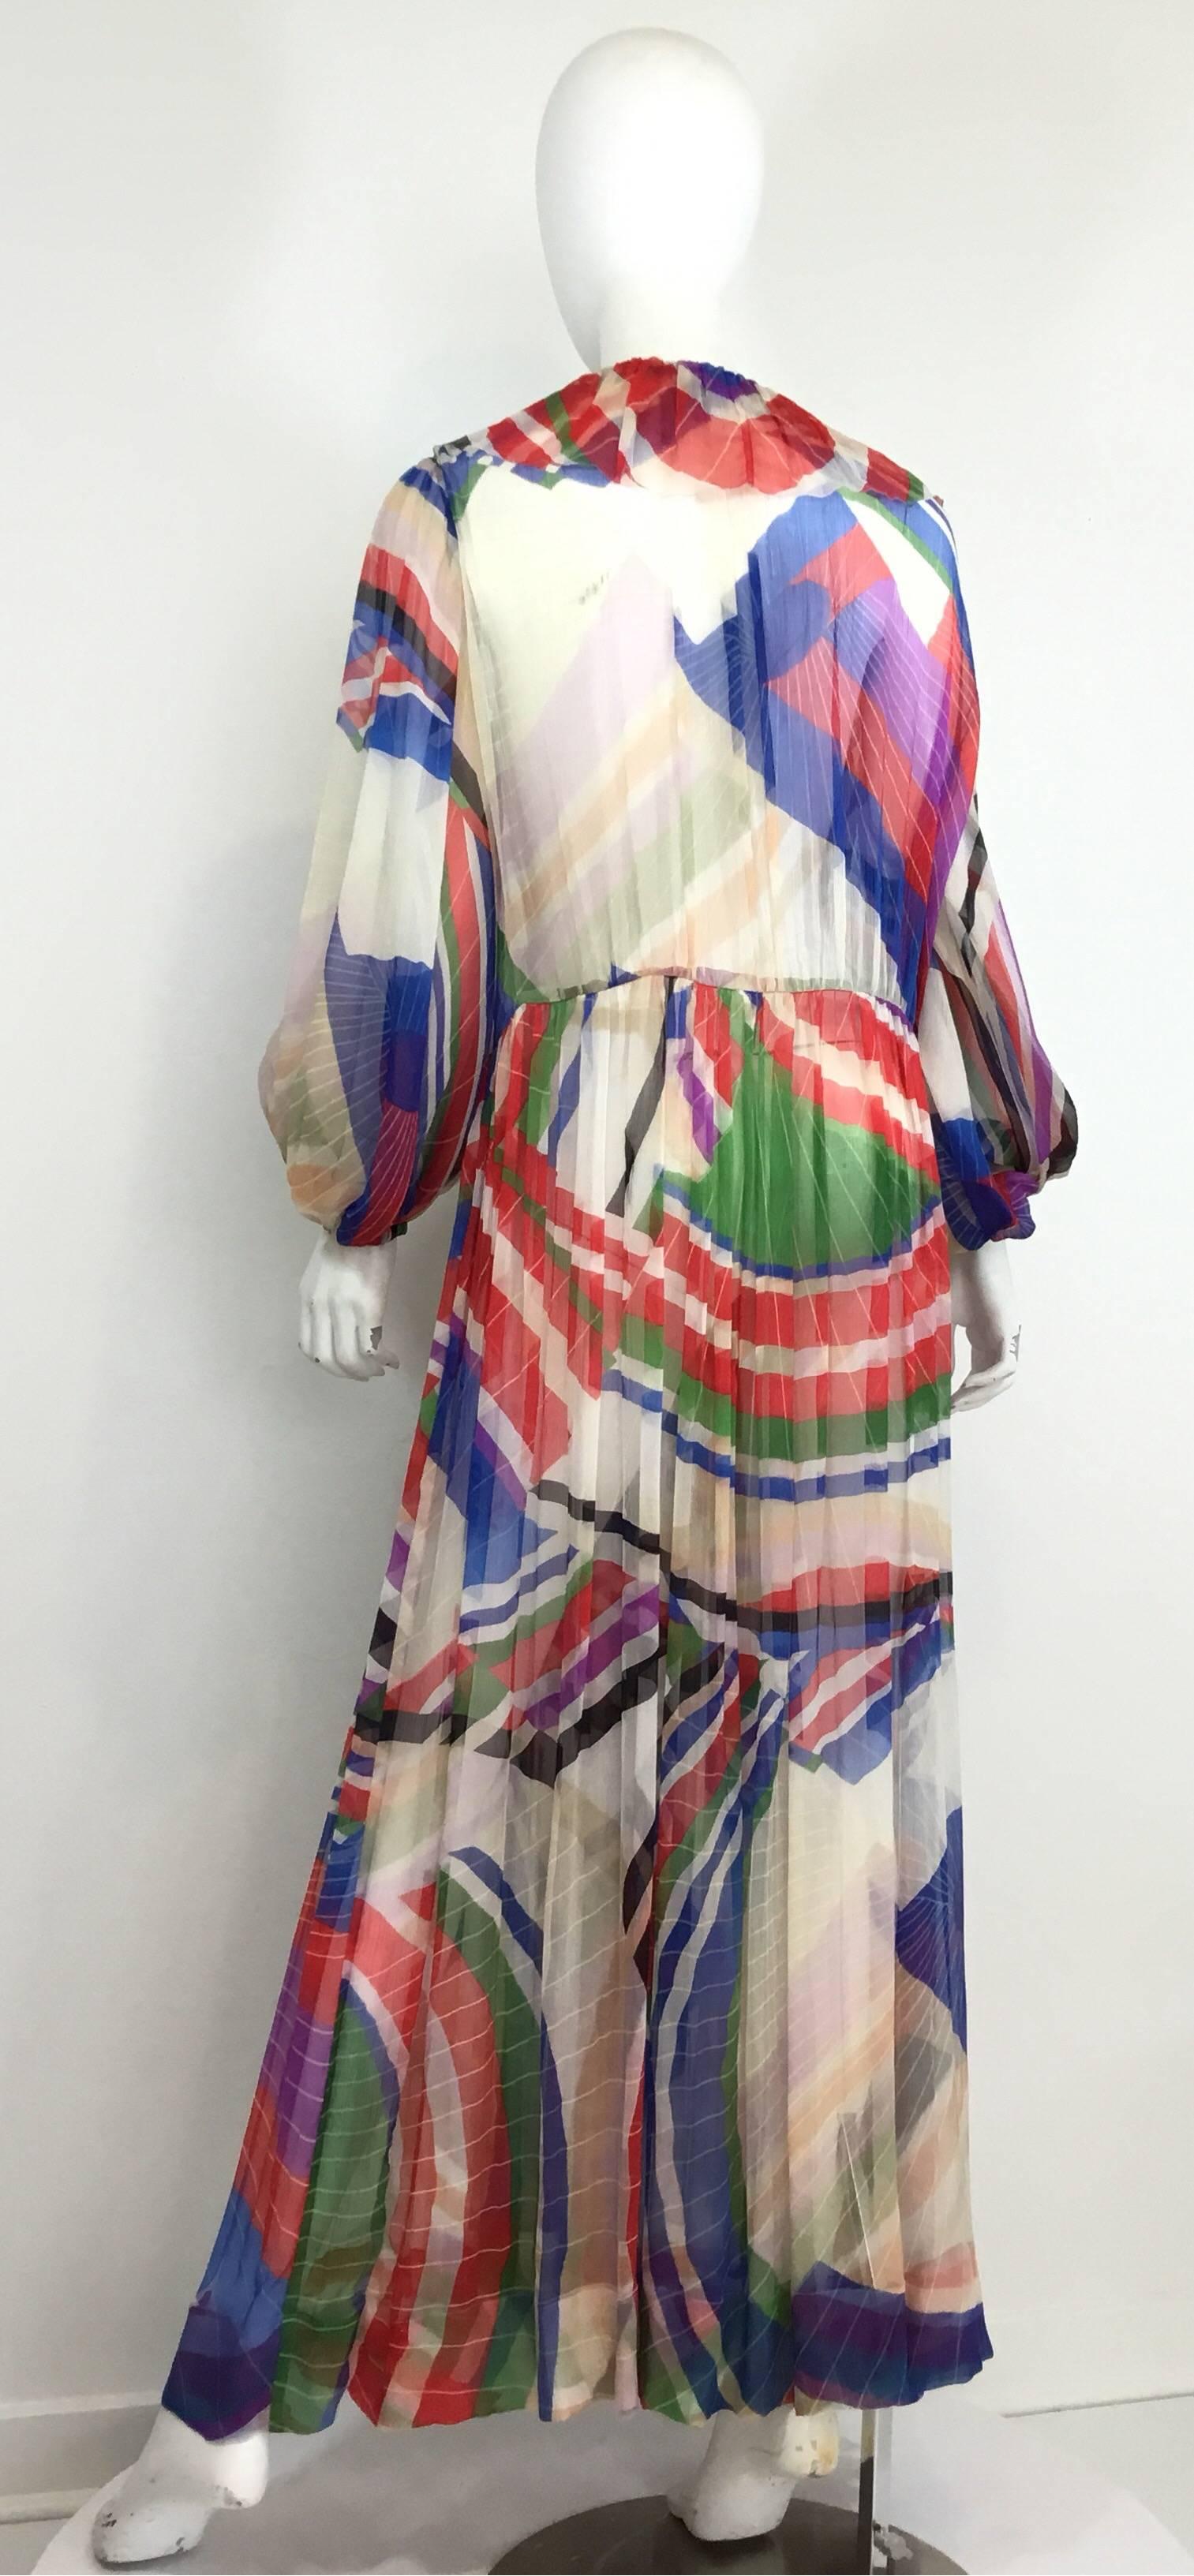 Chanel silk chiffon multicolored print gown or caftan features a concealed hook & eye and button closures at the front center, billow sleeves with elasticized cuffs. Gown is labeled a size 48, 100% silk, made in France. There are a few minor pulls